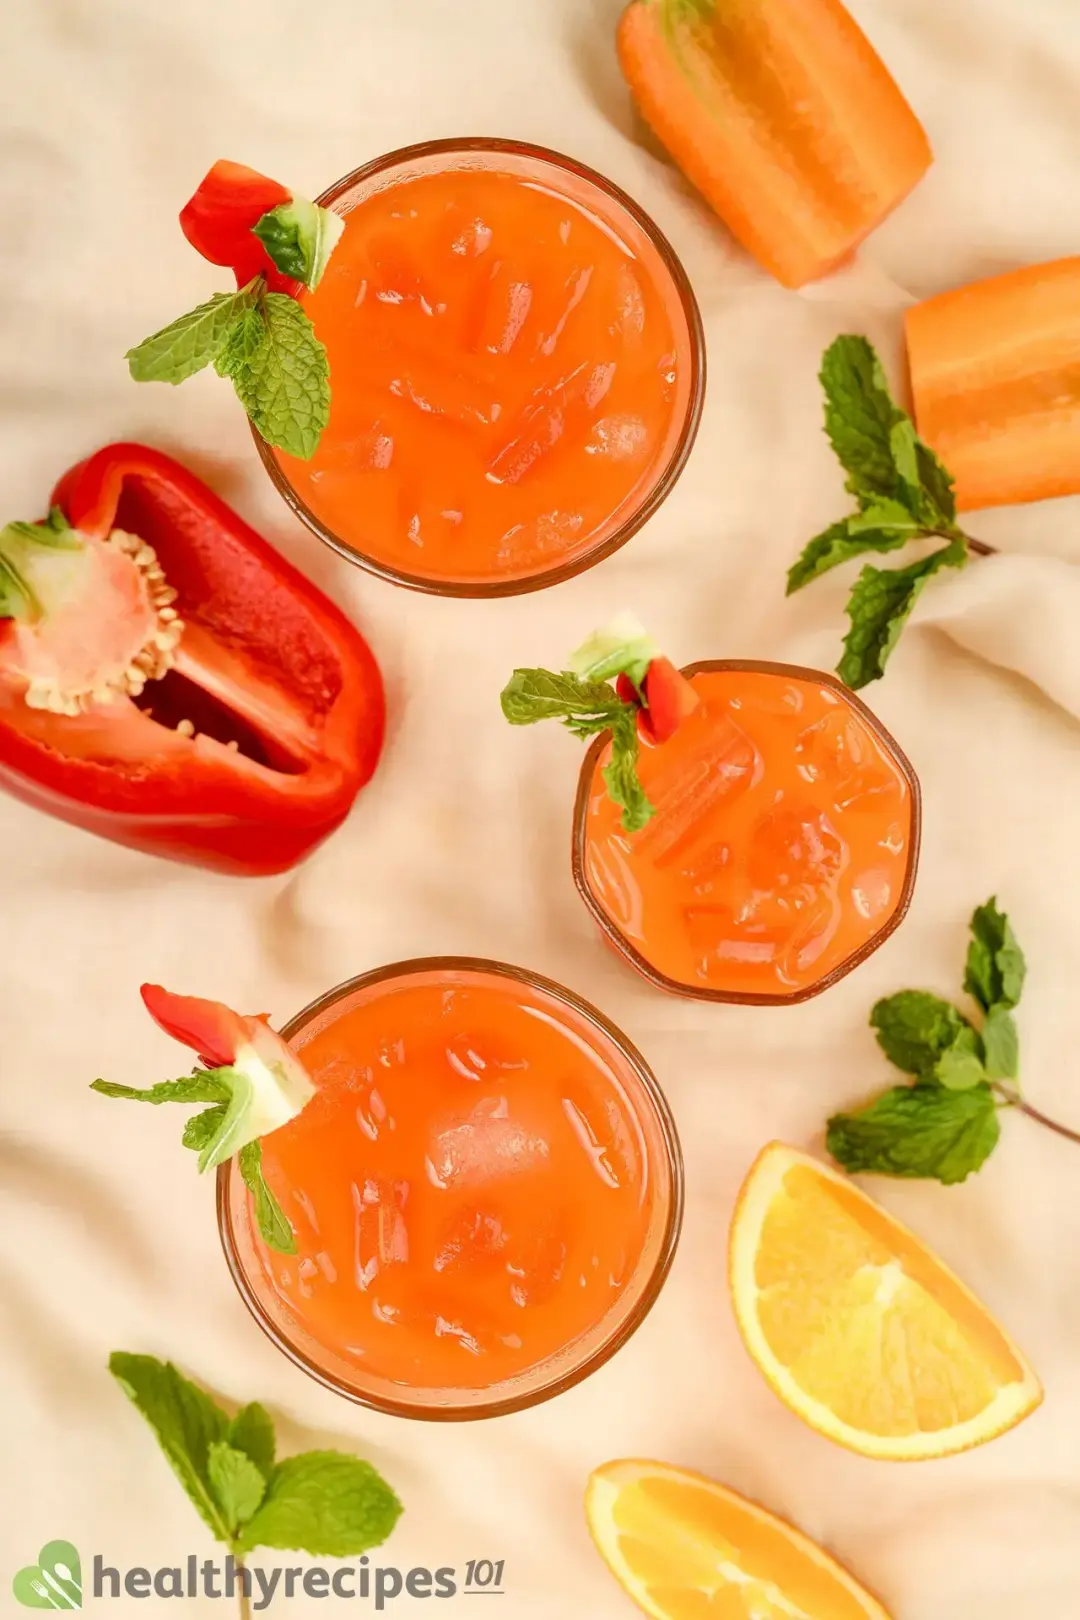 Three glasses of bell pepper juice drinks with carrots, oranges, mints, and bell pepper on a beige cloth